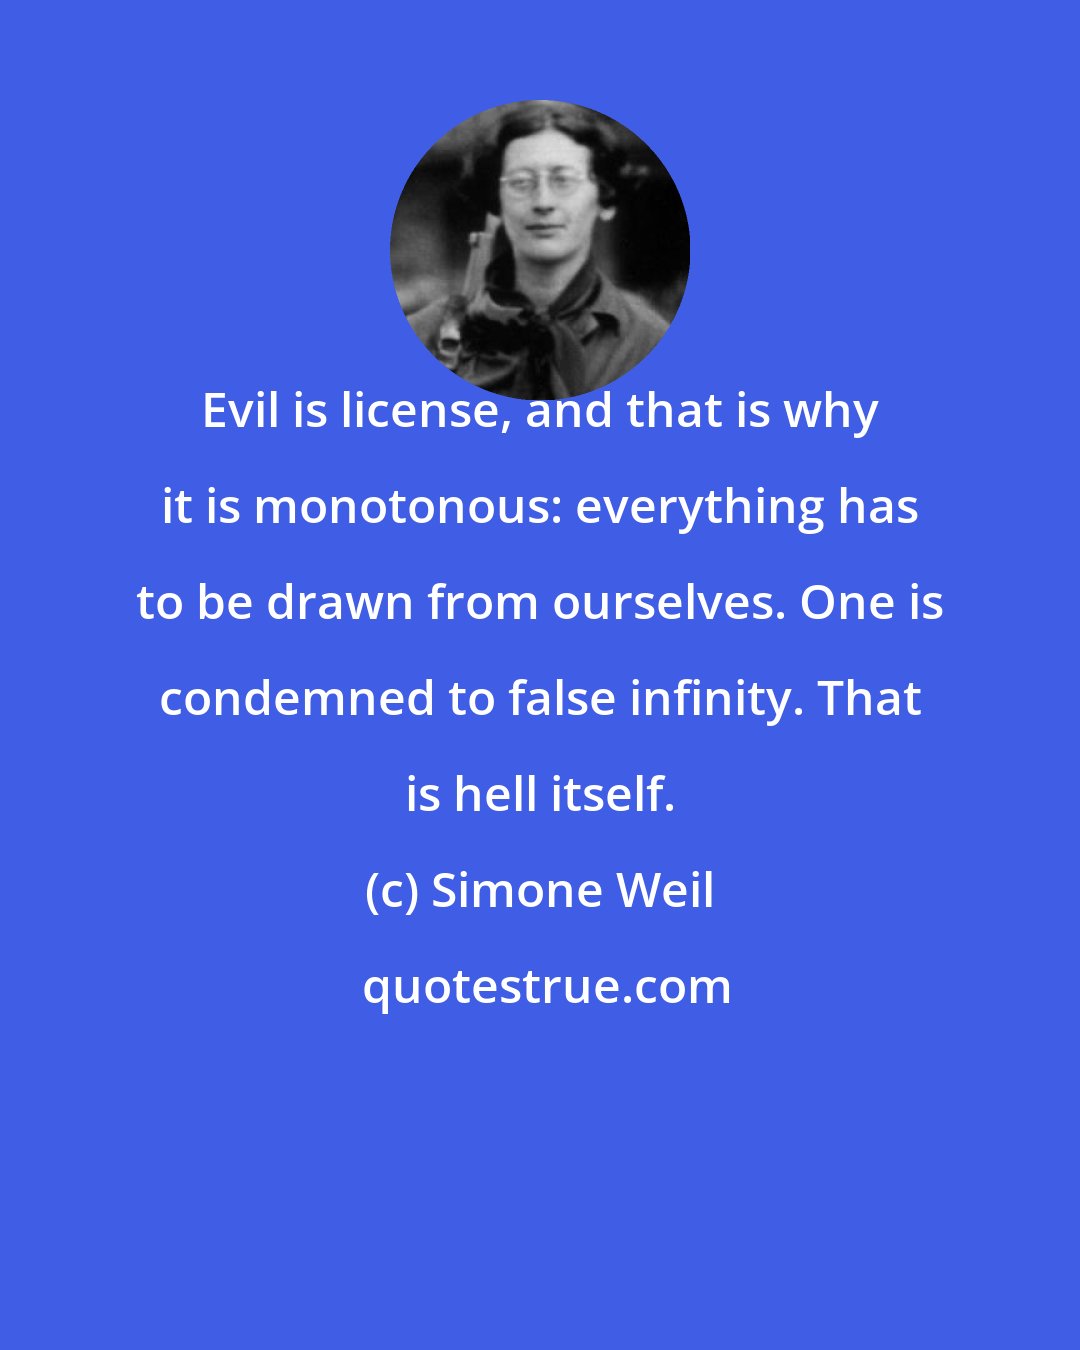 Simone Weil: Evil is license, and that is why it is monotonous: everything has to be drawn from ourselves. One is condemned to false infinity. That is hell itself.